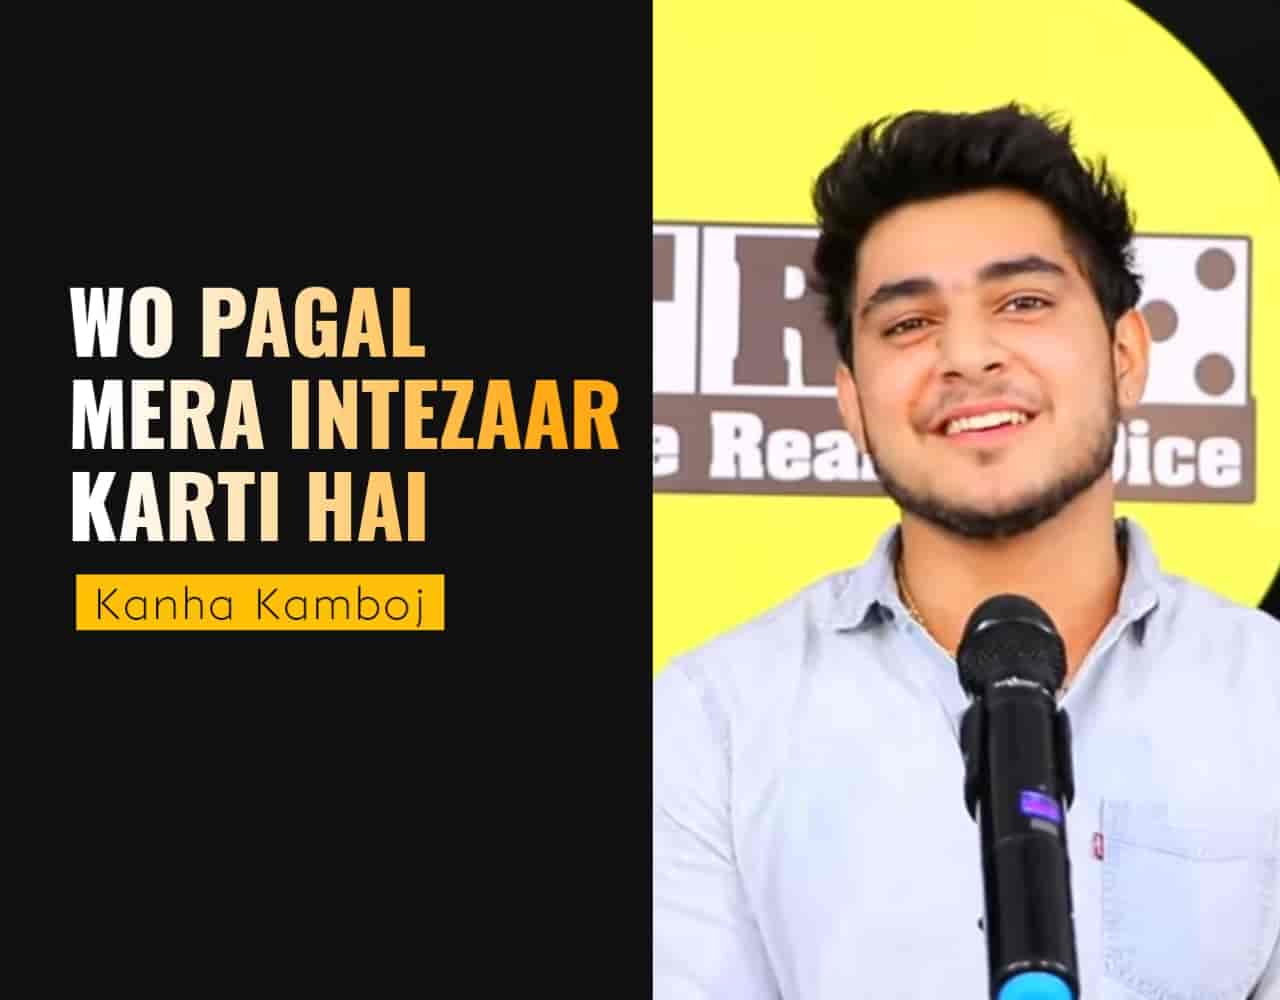 This beautiful Poetry  'Wo Pagal Mera Intezaar Karti Hai' for The Realistic Dice is performed by Kanha Kamboj and also written by him which is very beautiful a piece.